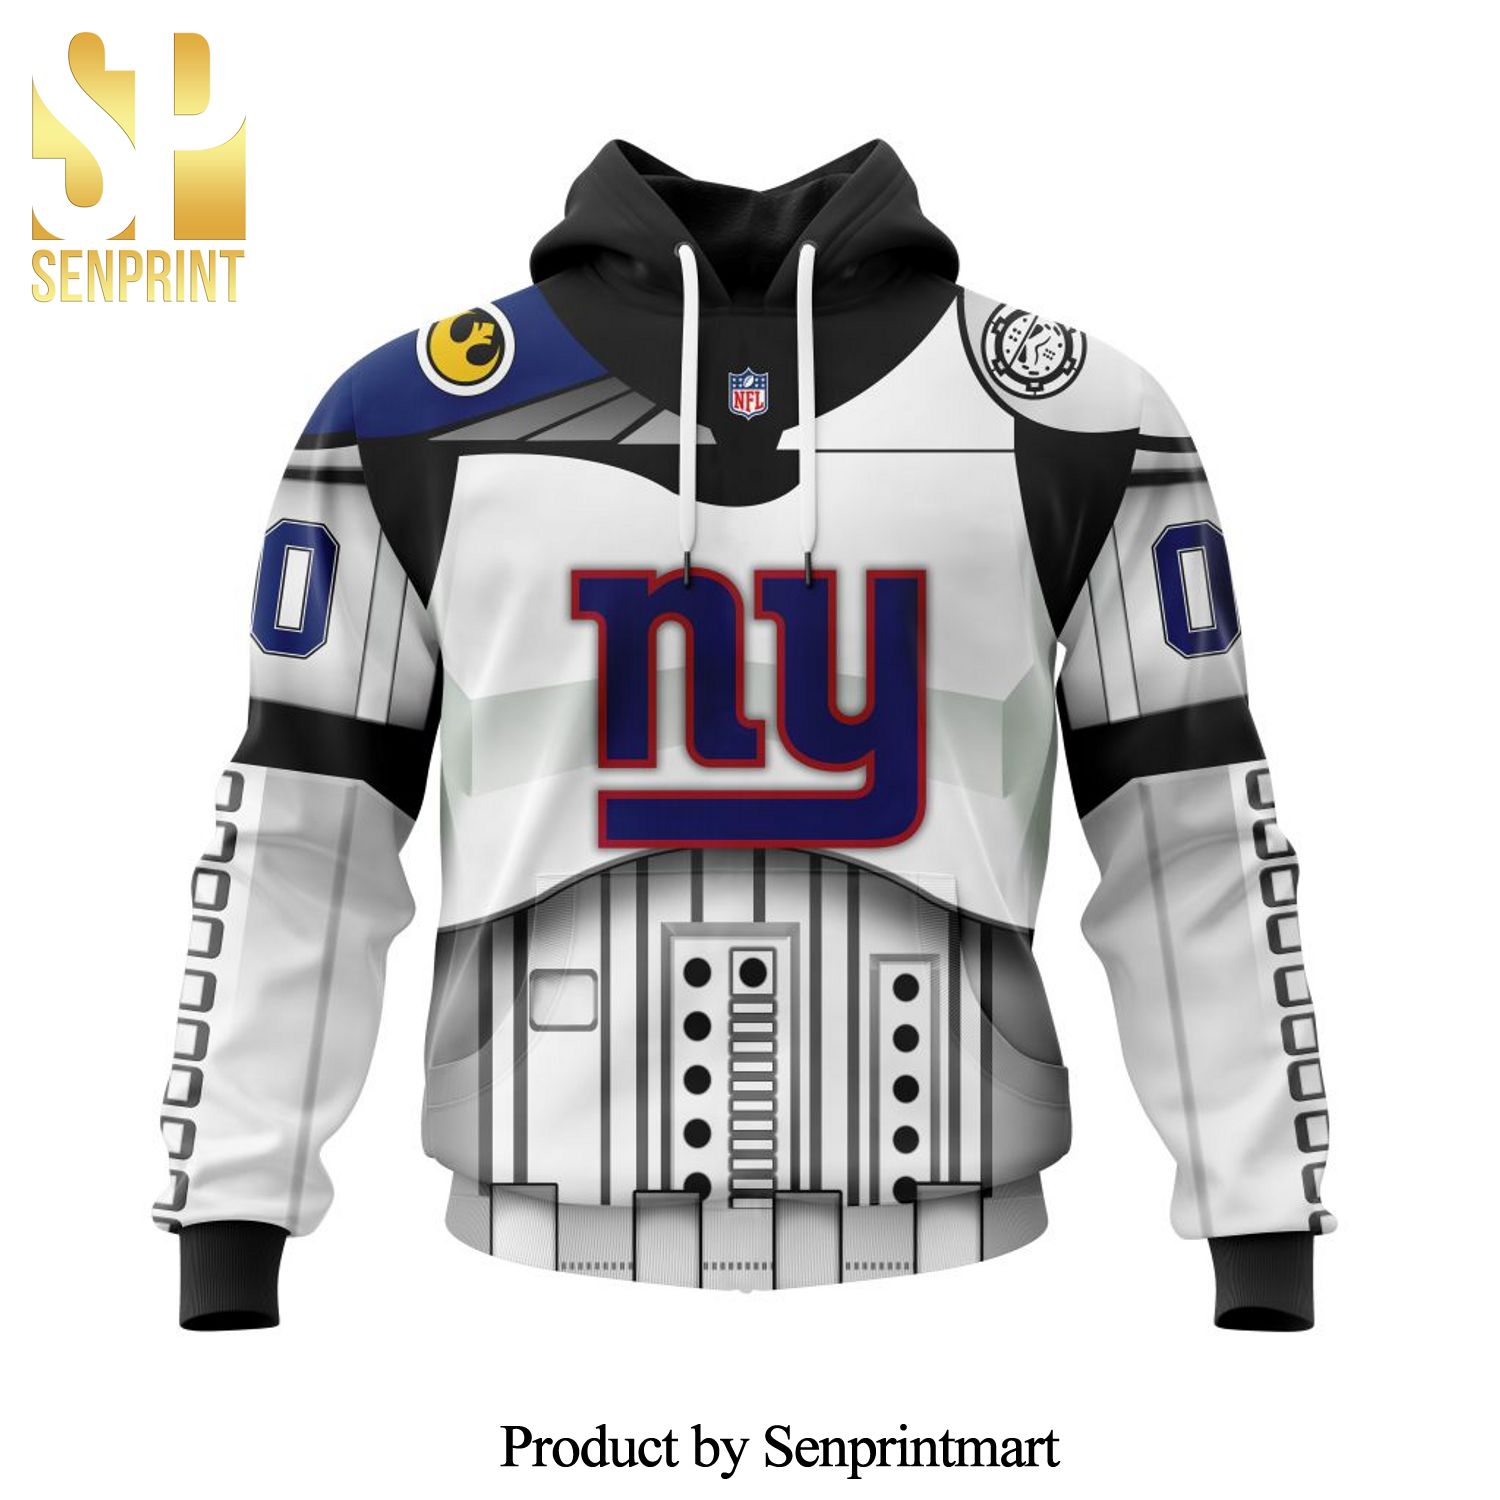 New York Giants Version Star Wars May The 4th Be With You All Over Printed Shirt